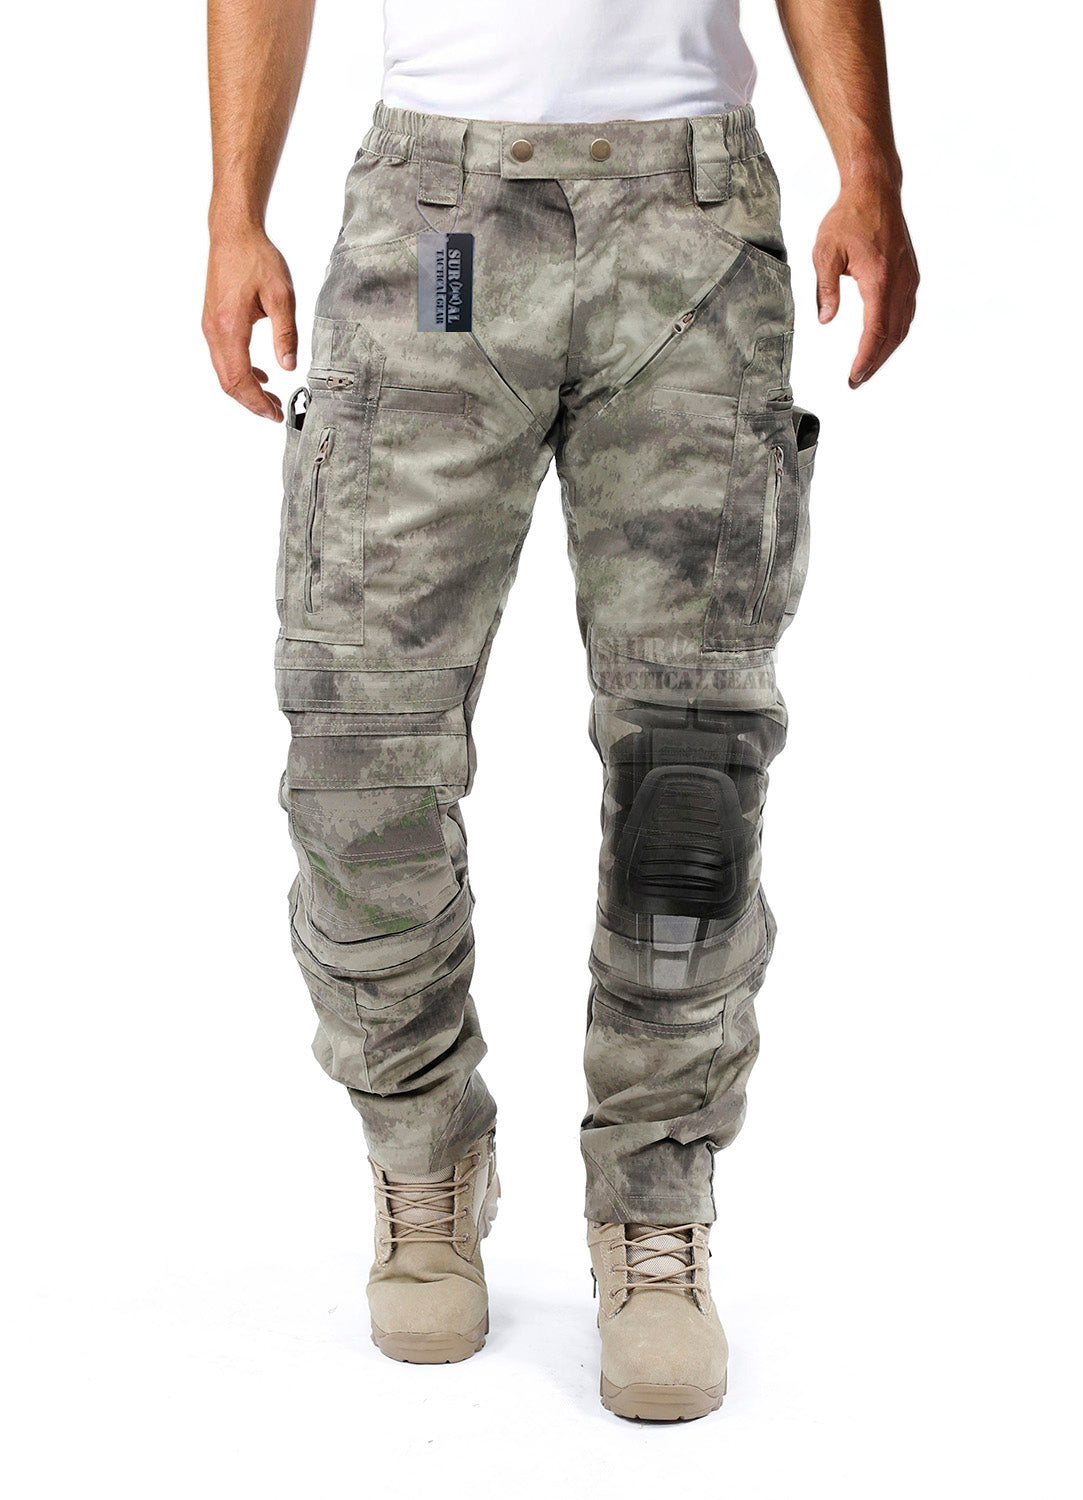 Tactical Pants with Knee Protection System & Air Circulation